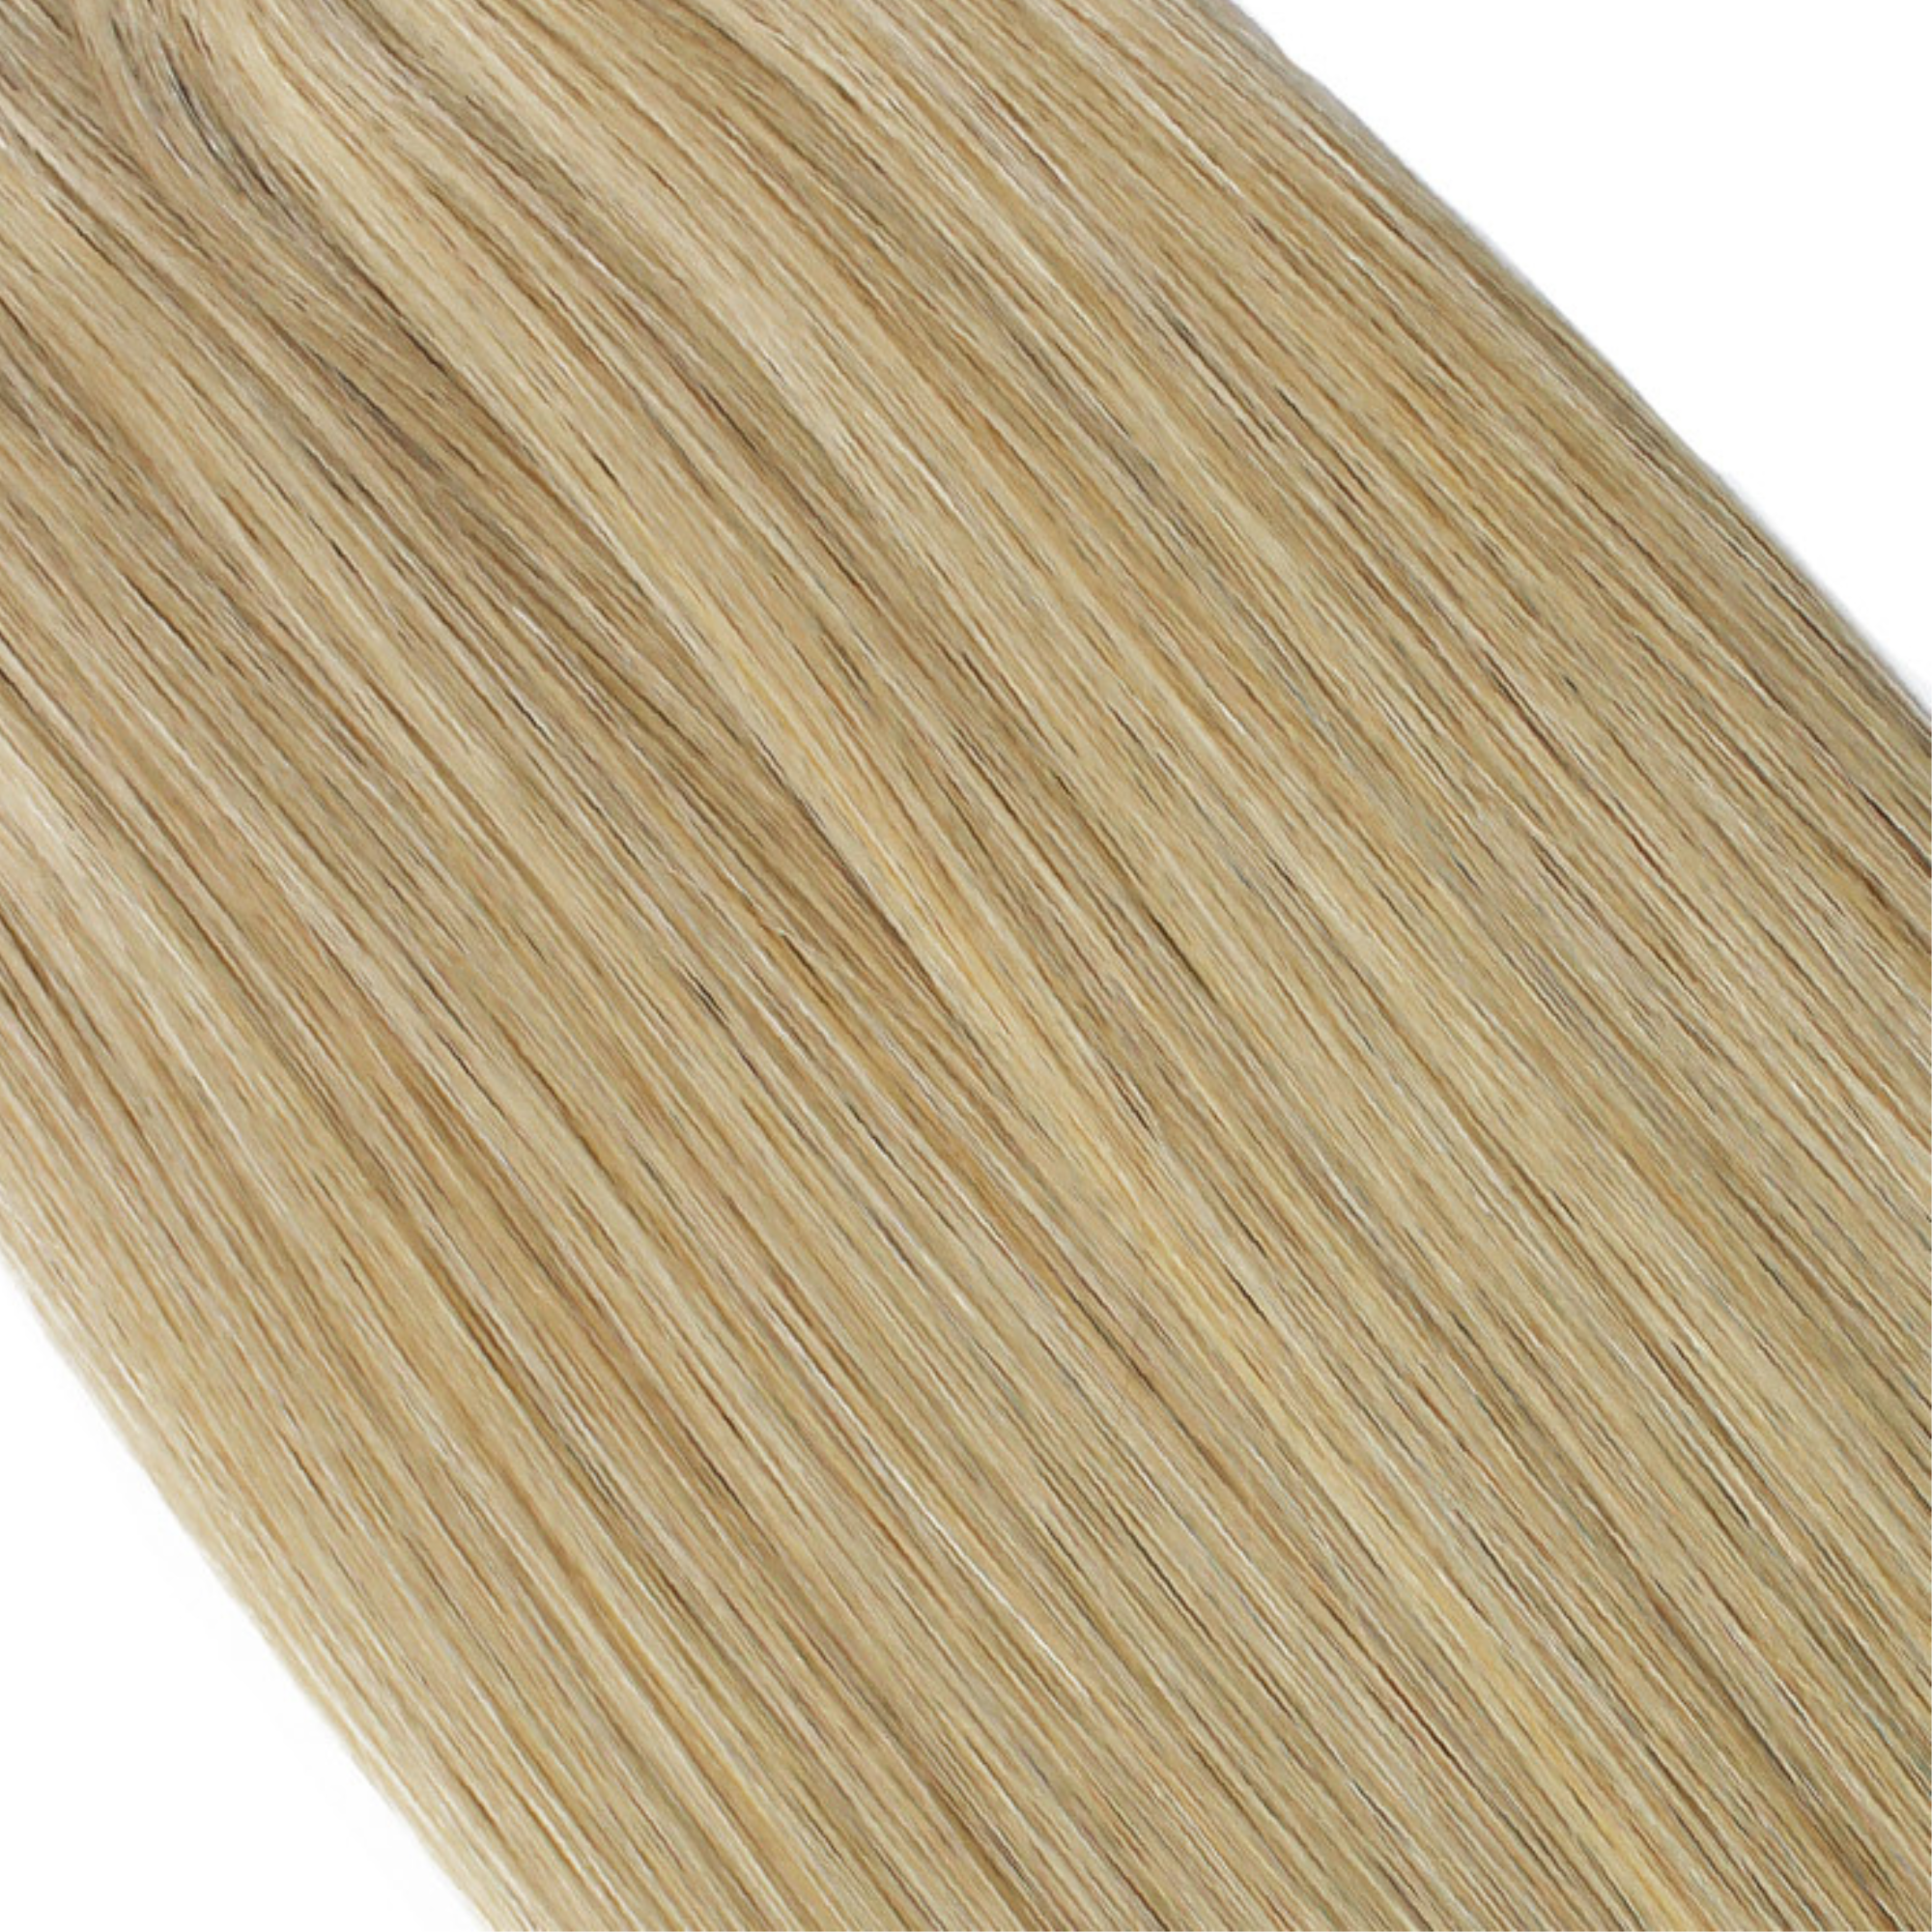 "hair rehab london 18" tape hair extensions shade swatch titled dirty blonde"